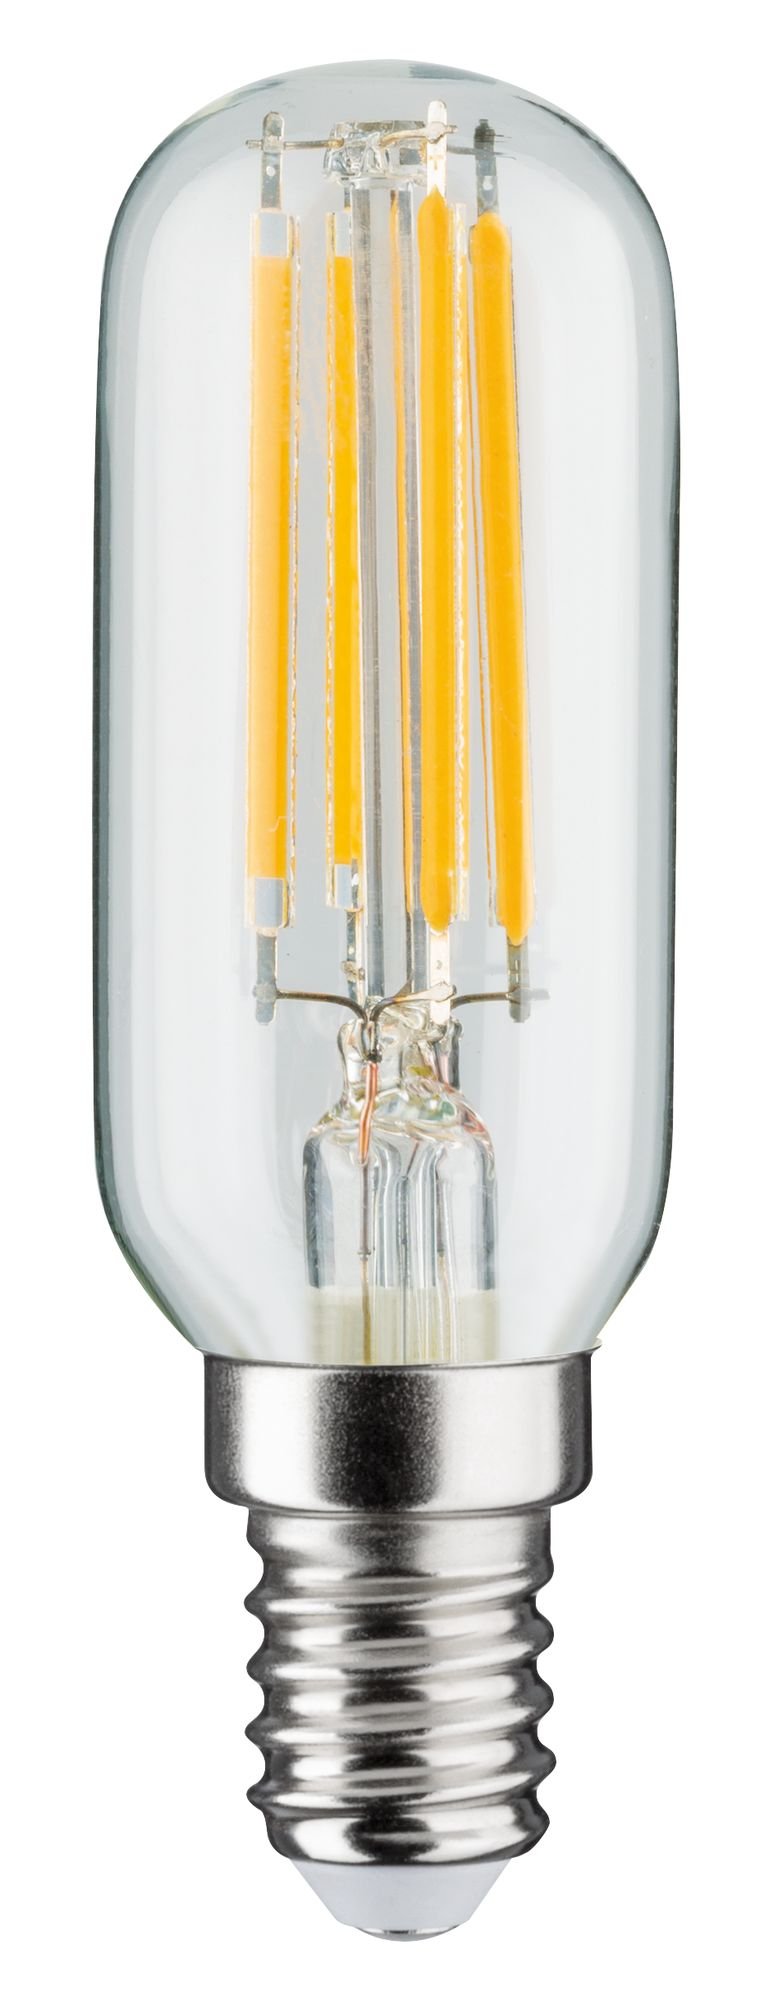 230 V Filament LED Tube E14 470lm 4,8W 2700K dimmable Clear